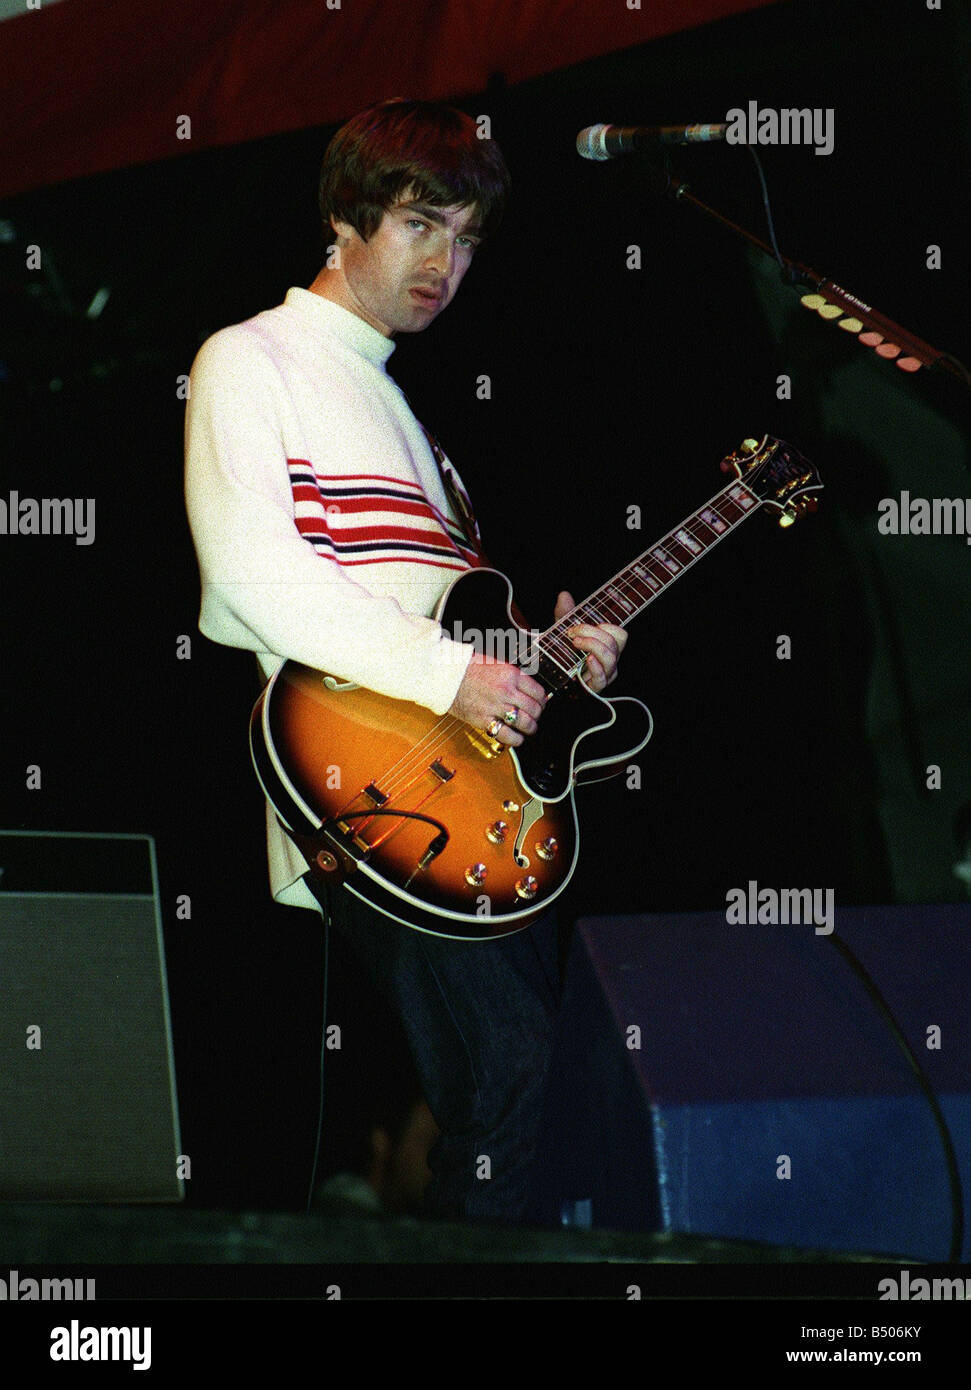 Noel Gallagher of Oasis singing at their Knebworth concert Stock Photo